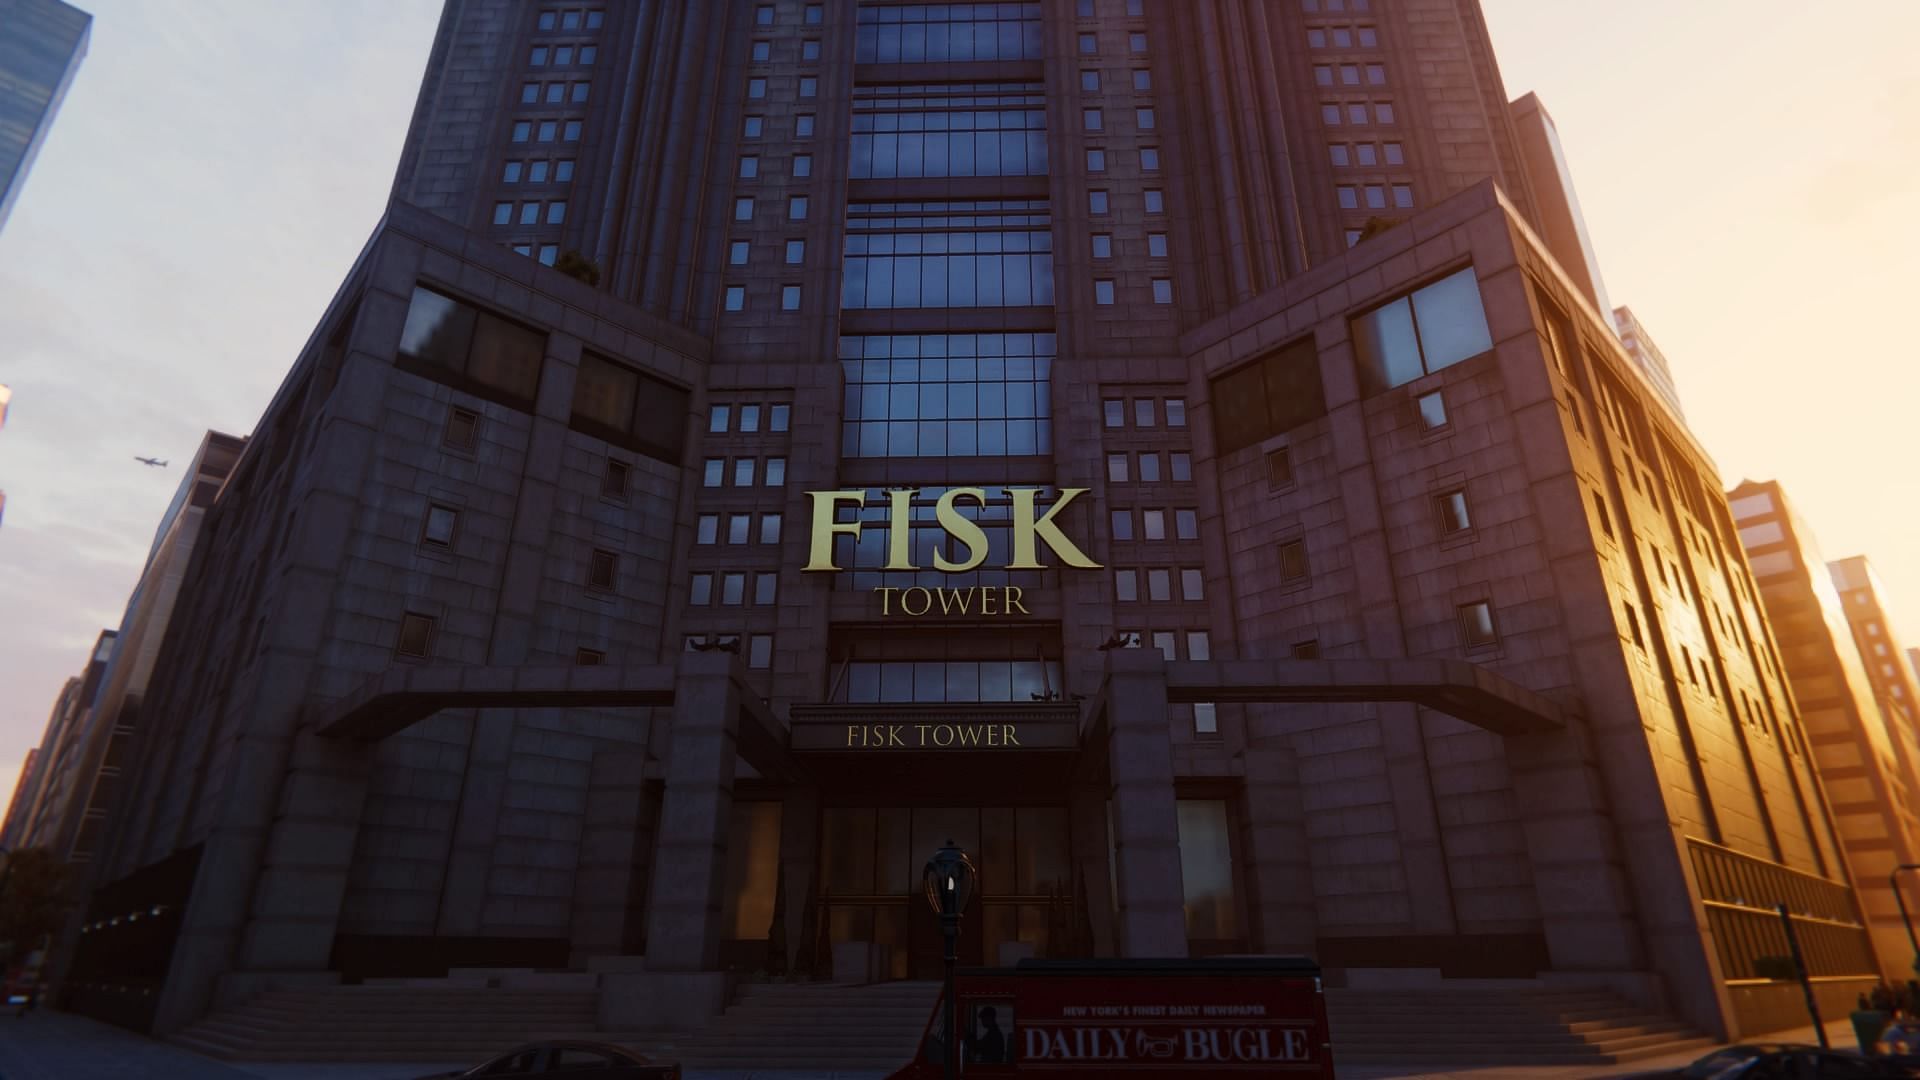 The Fisk Tower in Spider-Man (Image via Marvel)